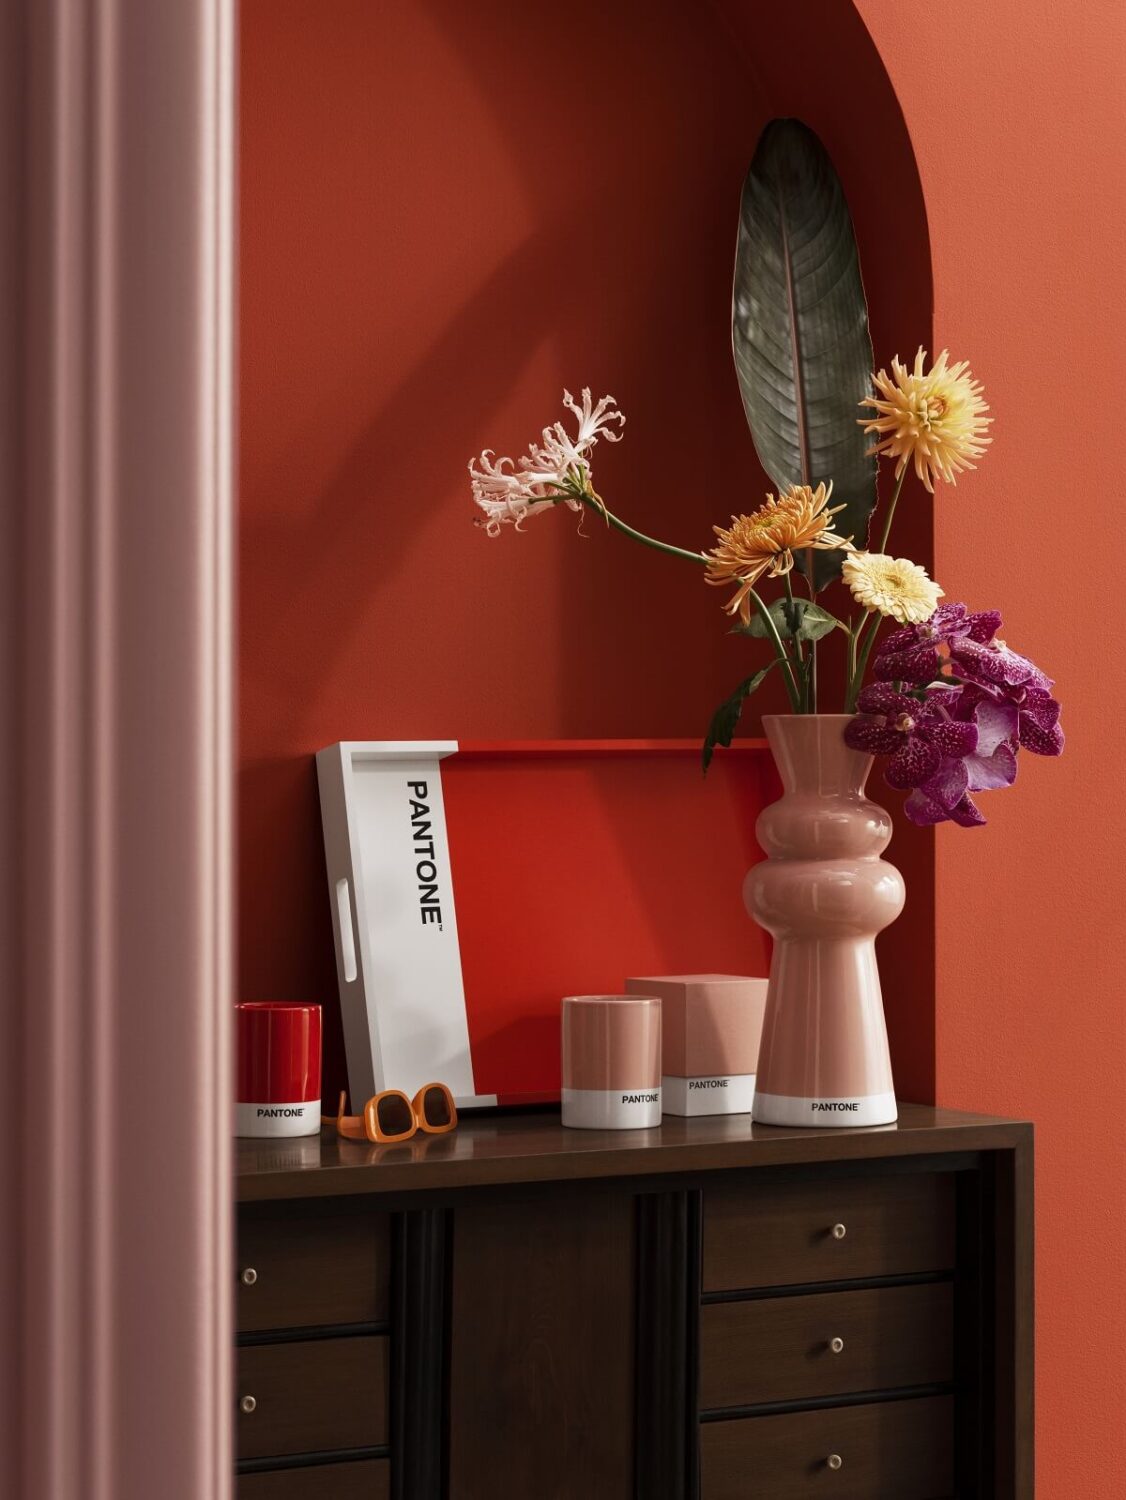 H&M-Home-Pantone-The-Power-of-Color-red-color-detail-nordroom